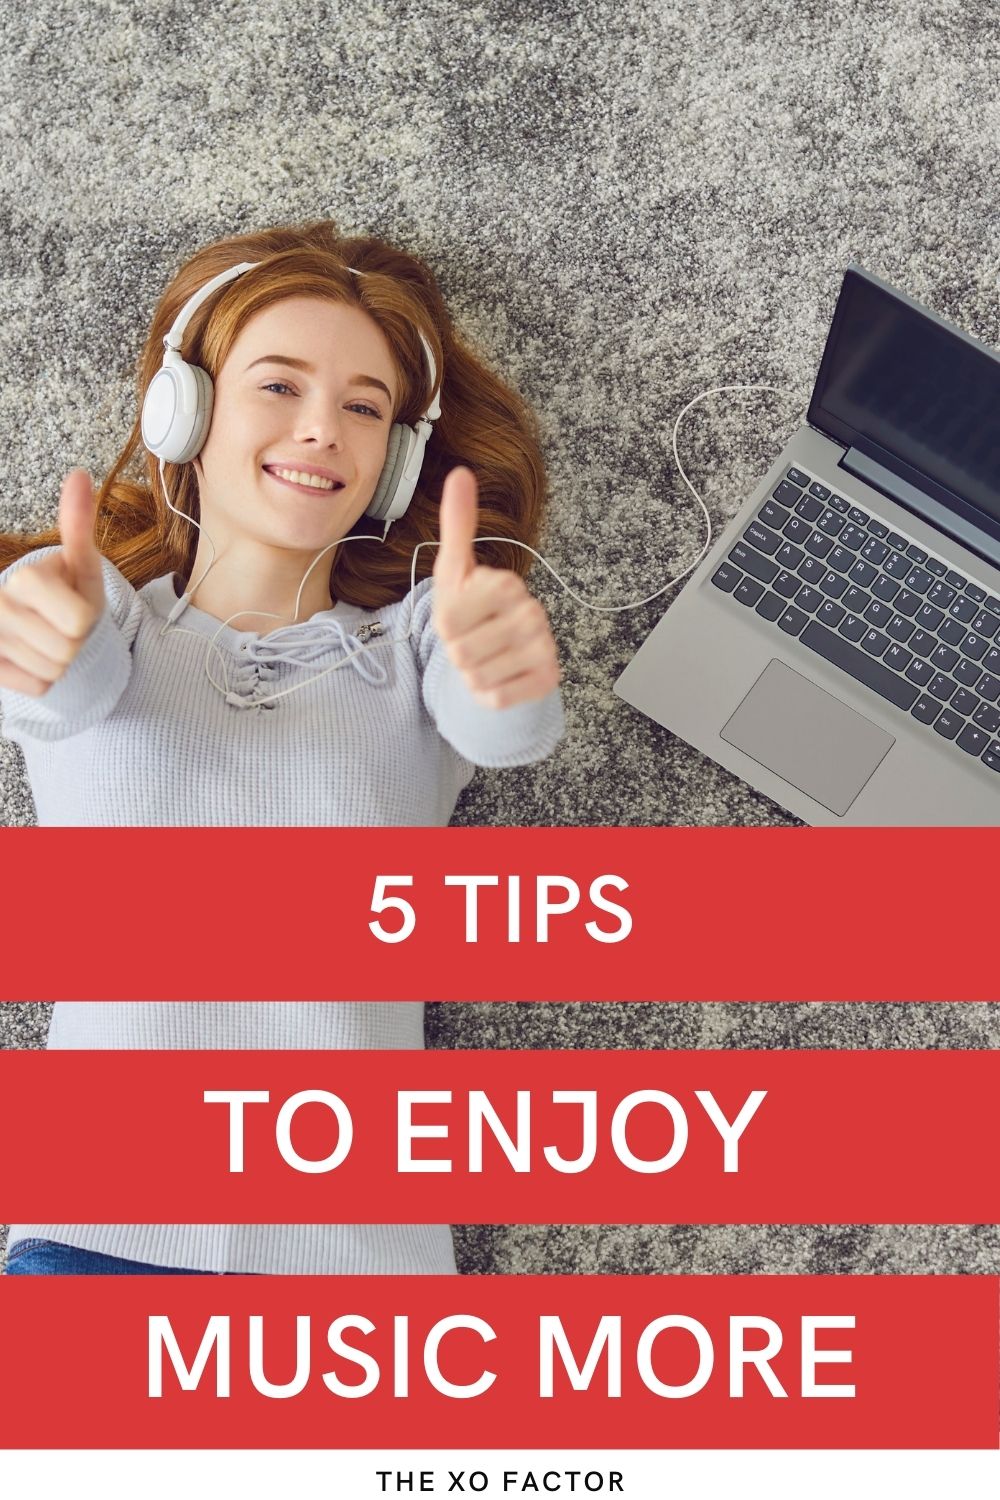 5 tips to enjoy music more